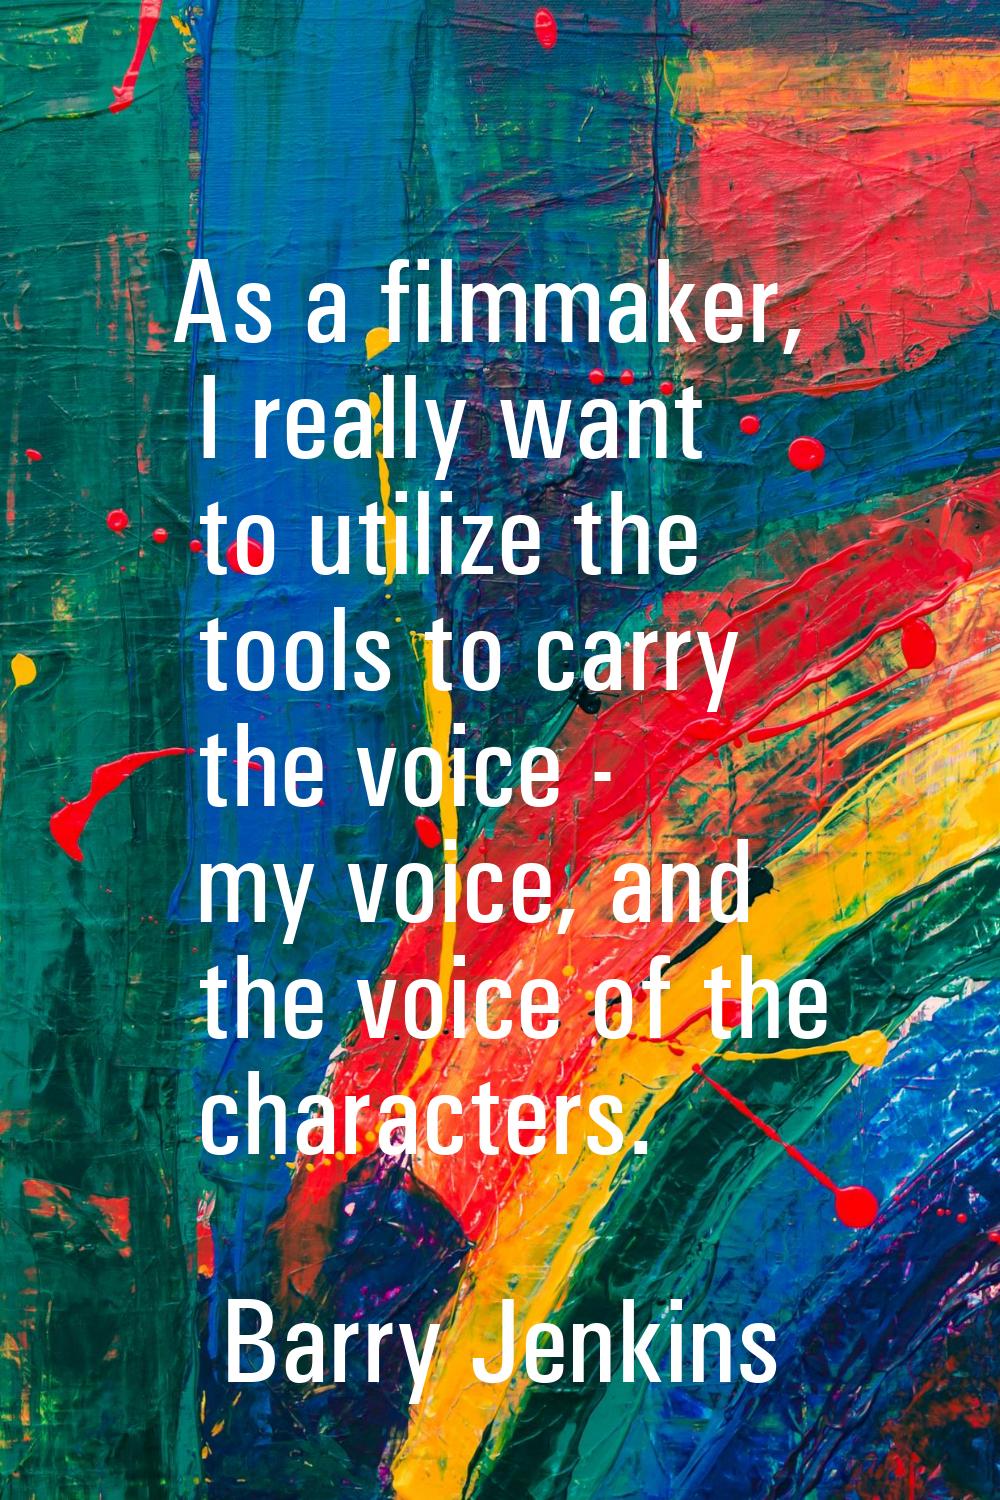 As a filmmaker, I really want to utilize the tools to carry the voice - my voice, and the voice of 